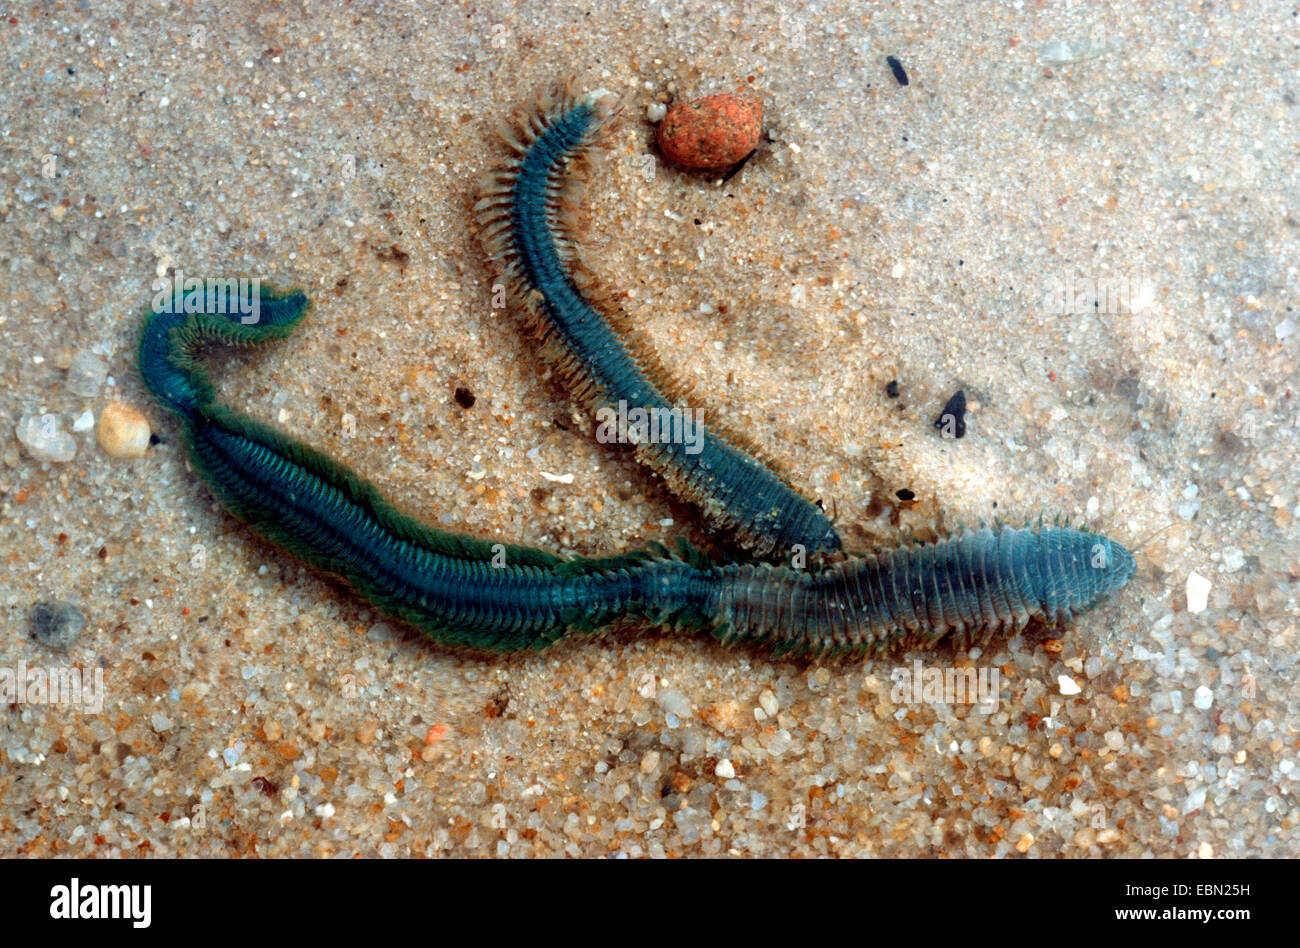 ragworm, sandworm, clam worm, king ragworm (Nereis virens, Neanthes virens), in the wadden sea, Germany, Wadden Sea NP Stock Photo